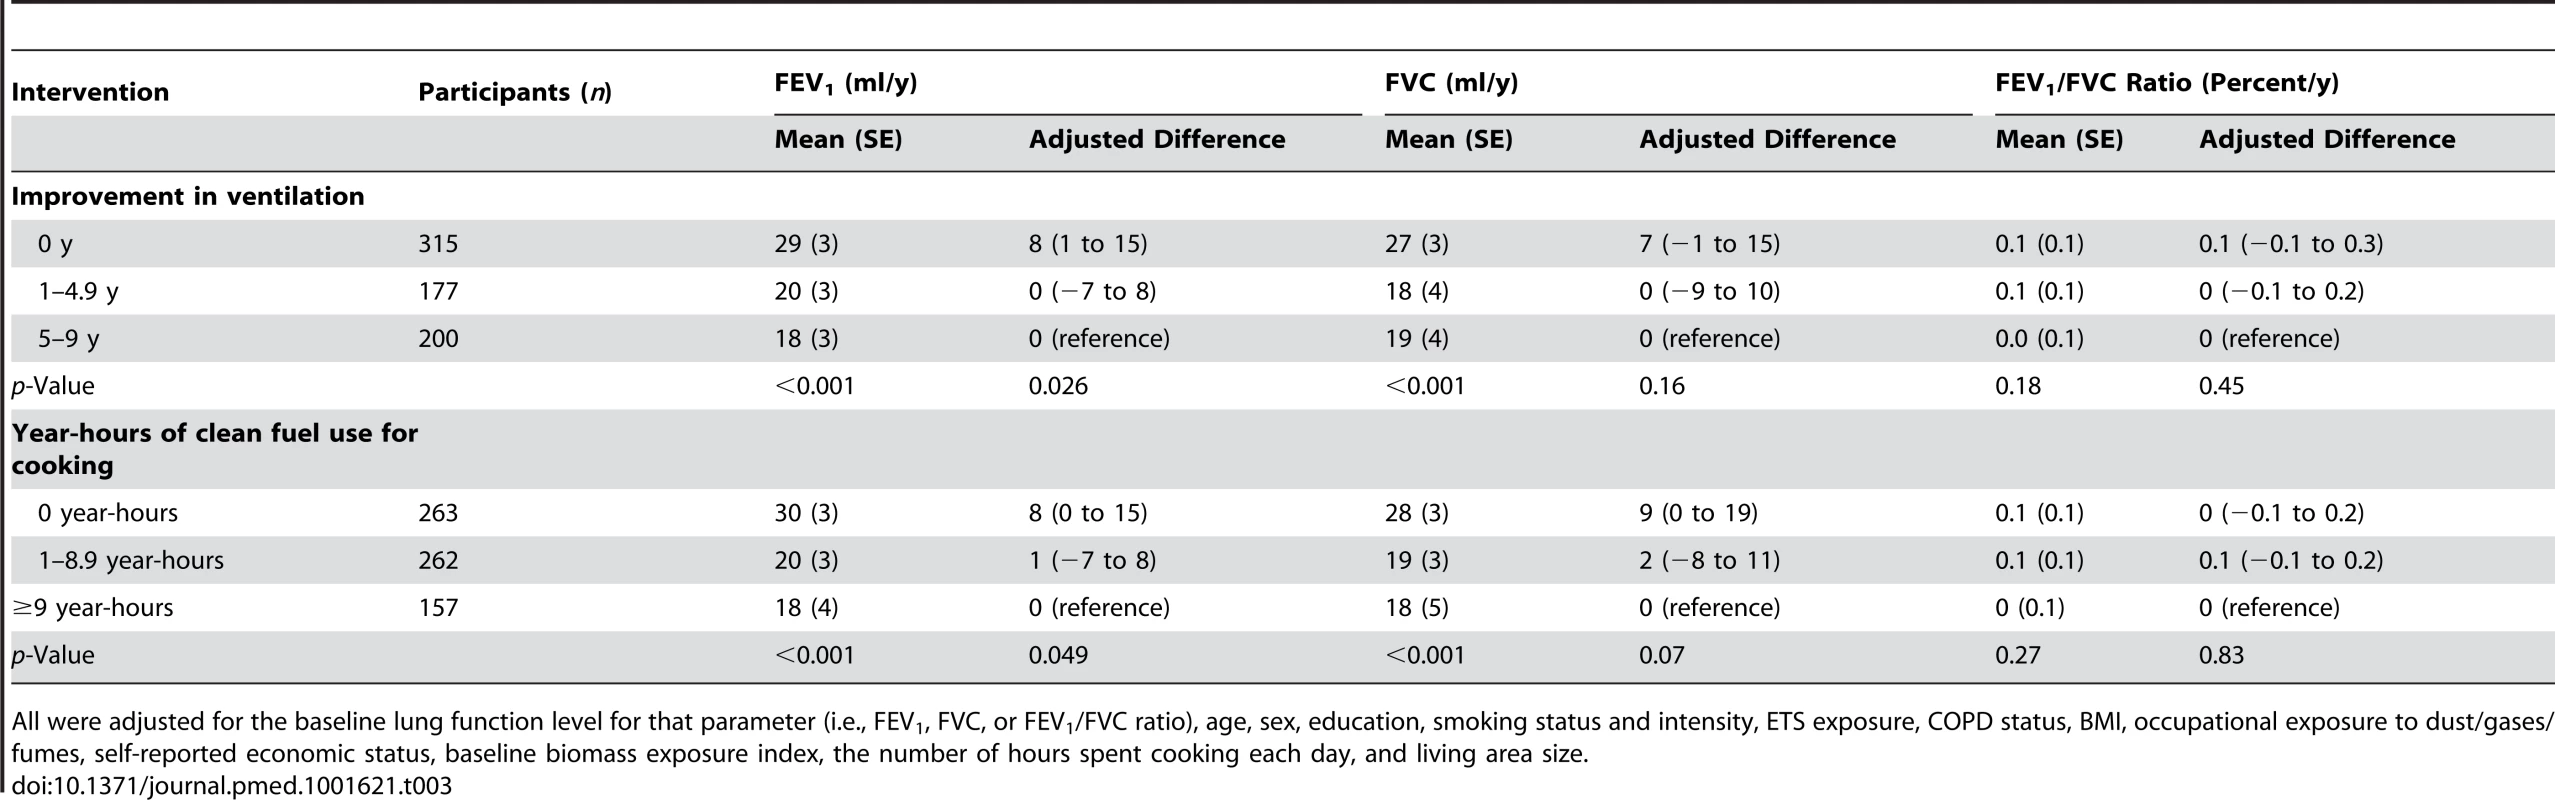 Differences between groups in annual declines in lung function over 9